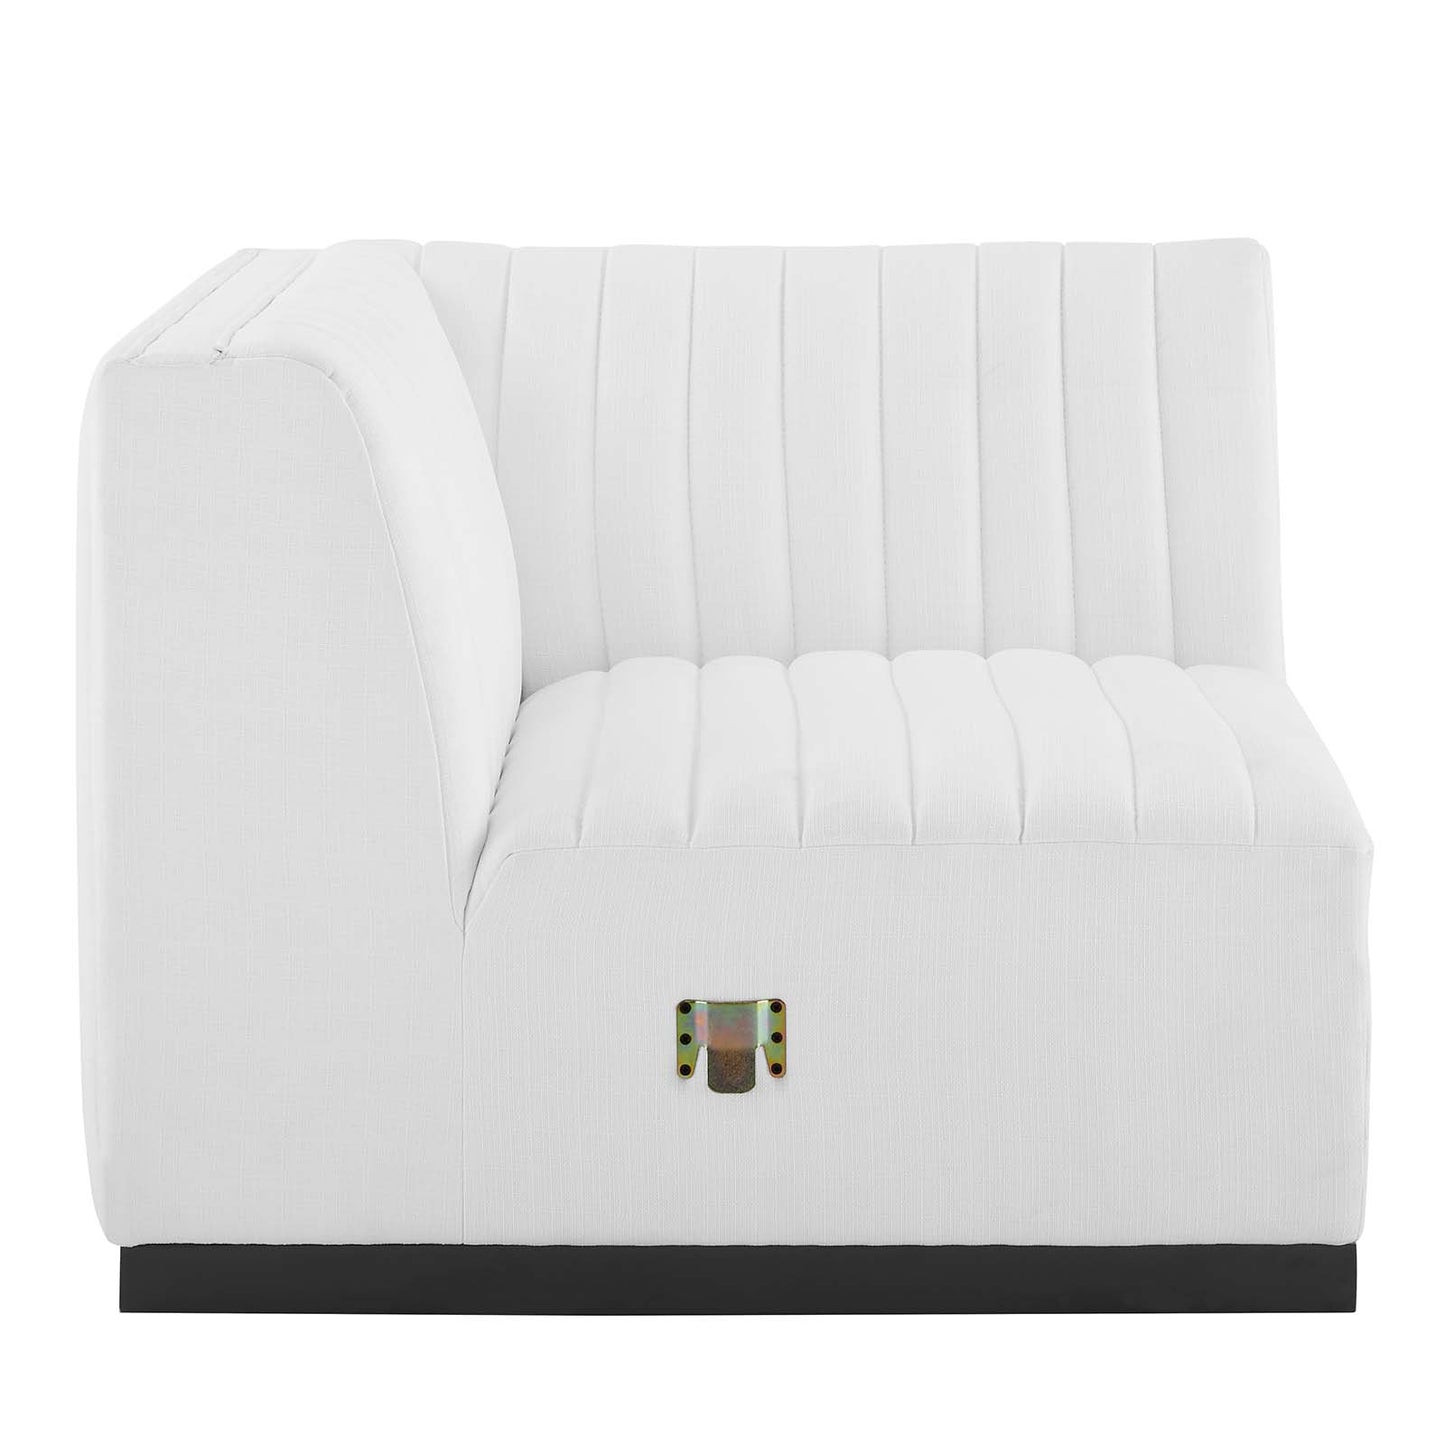 Conjure Channel Tufted Upholstered Fabric Left Corner Chair Black White EEI-5497-BLK-WHI